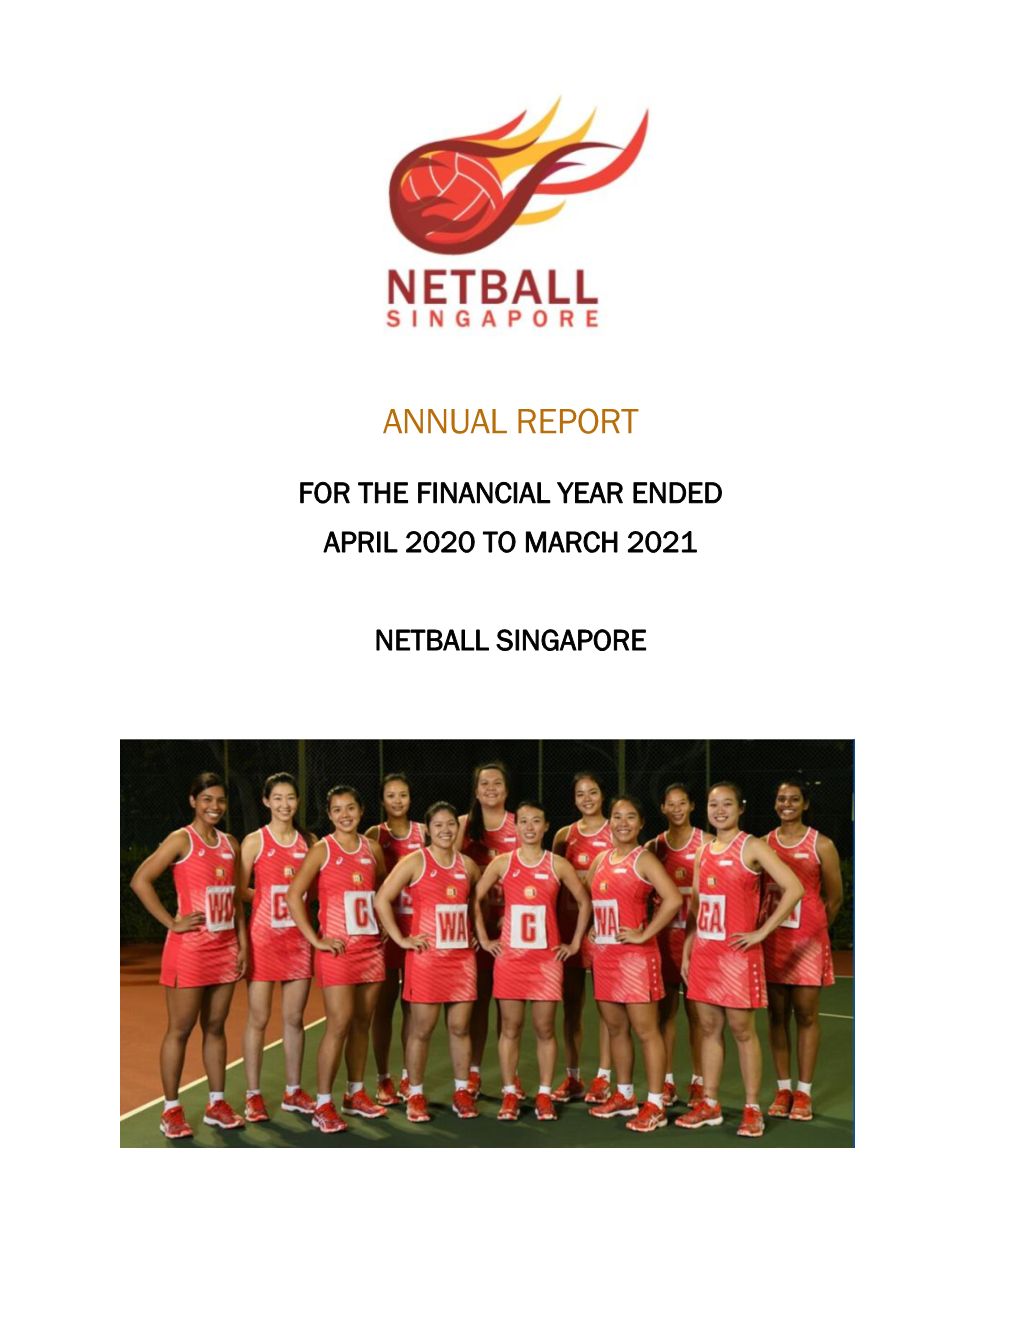 For the Financial Year Ended April 2020 to March 2021 Netball Singapore